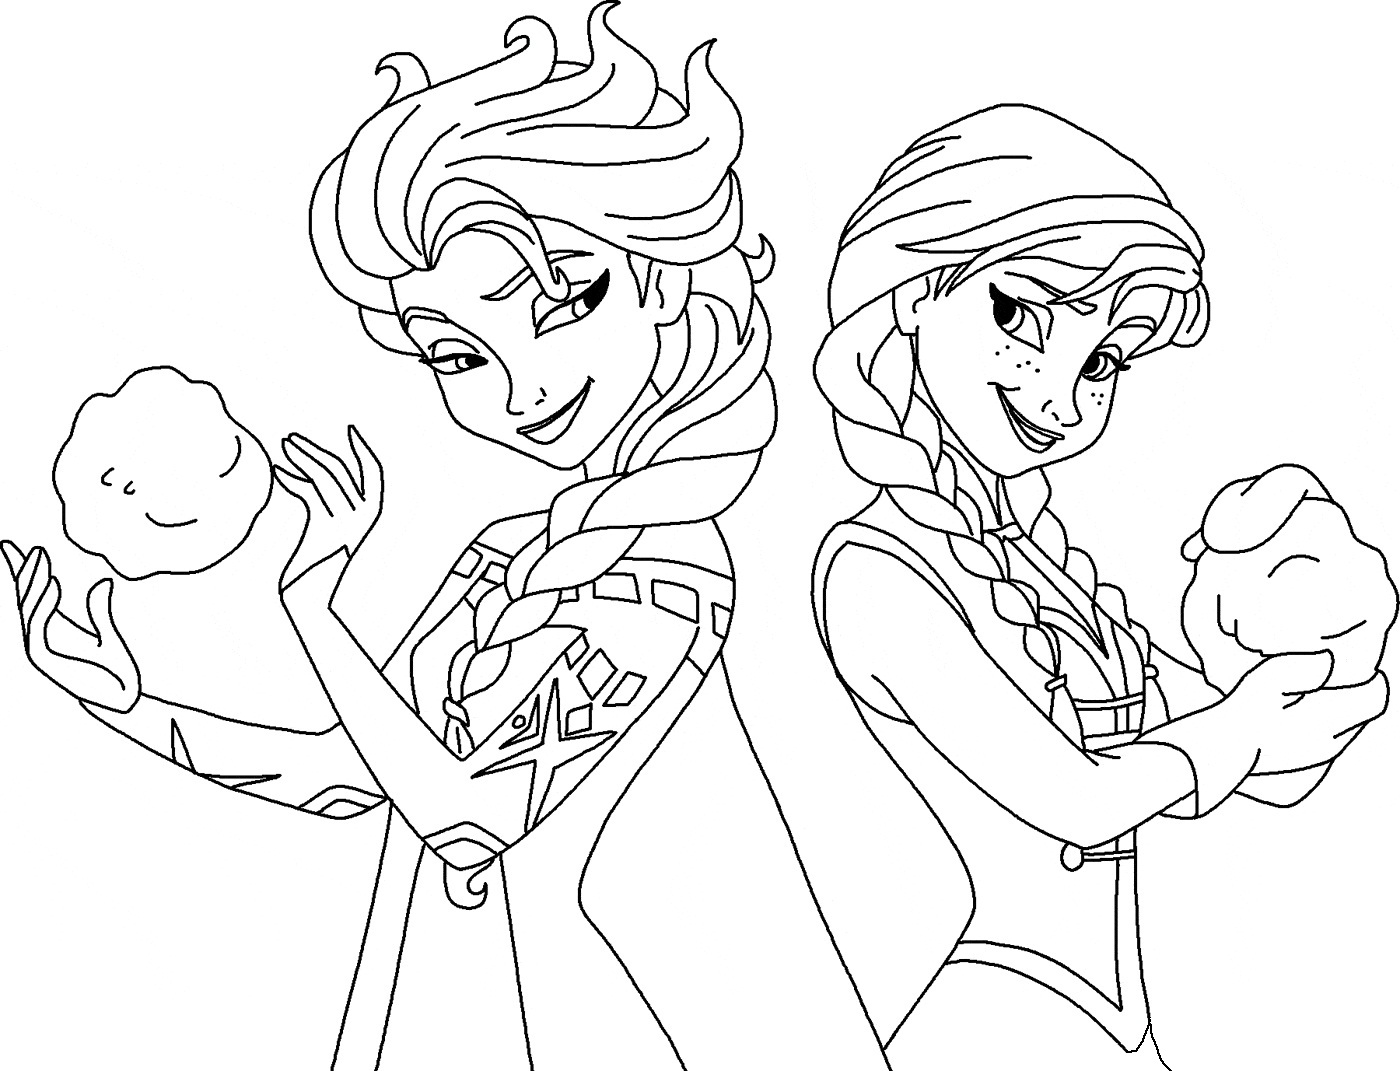 Frozen Elsa And Anna Coloring Page - Free Coloring Pages Online